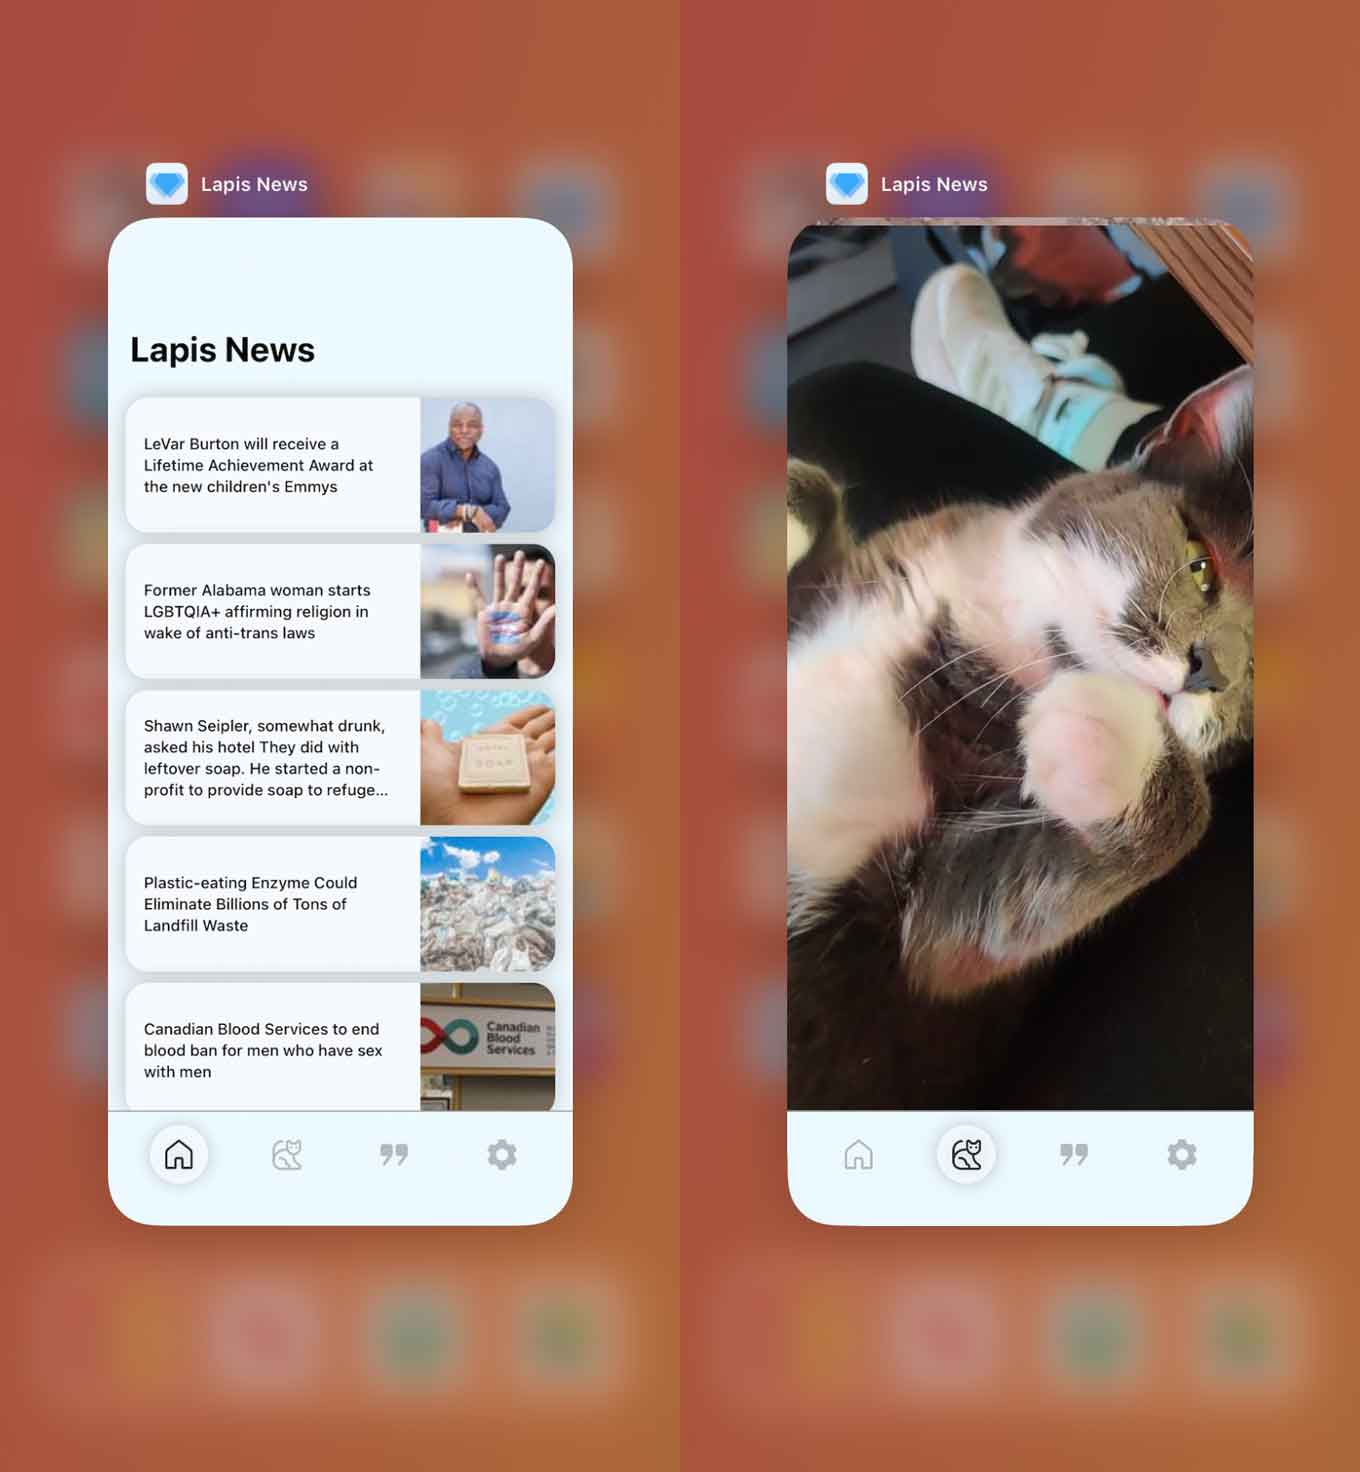 Good News App Lapis News, showing a series of uplifting news stories in a list and a video of a cat playing